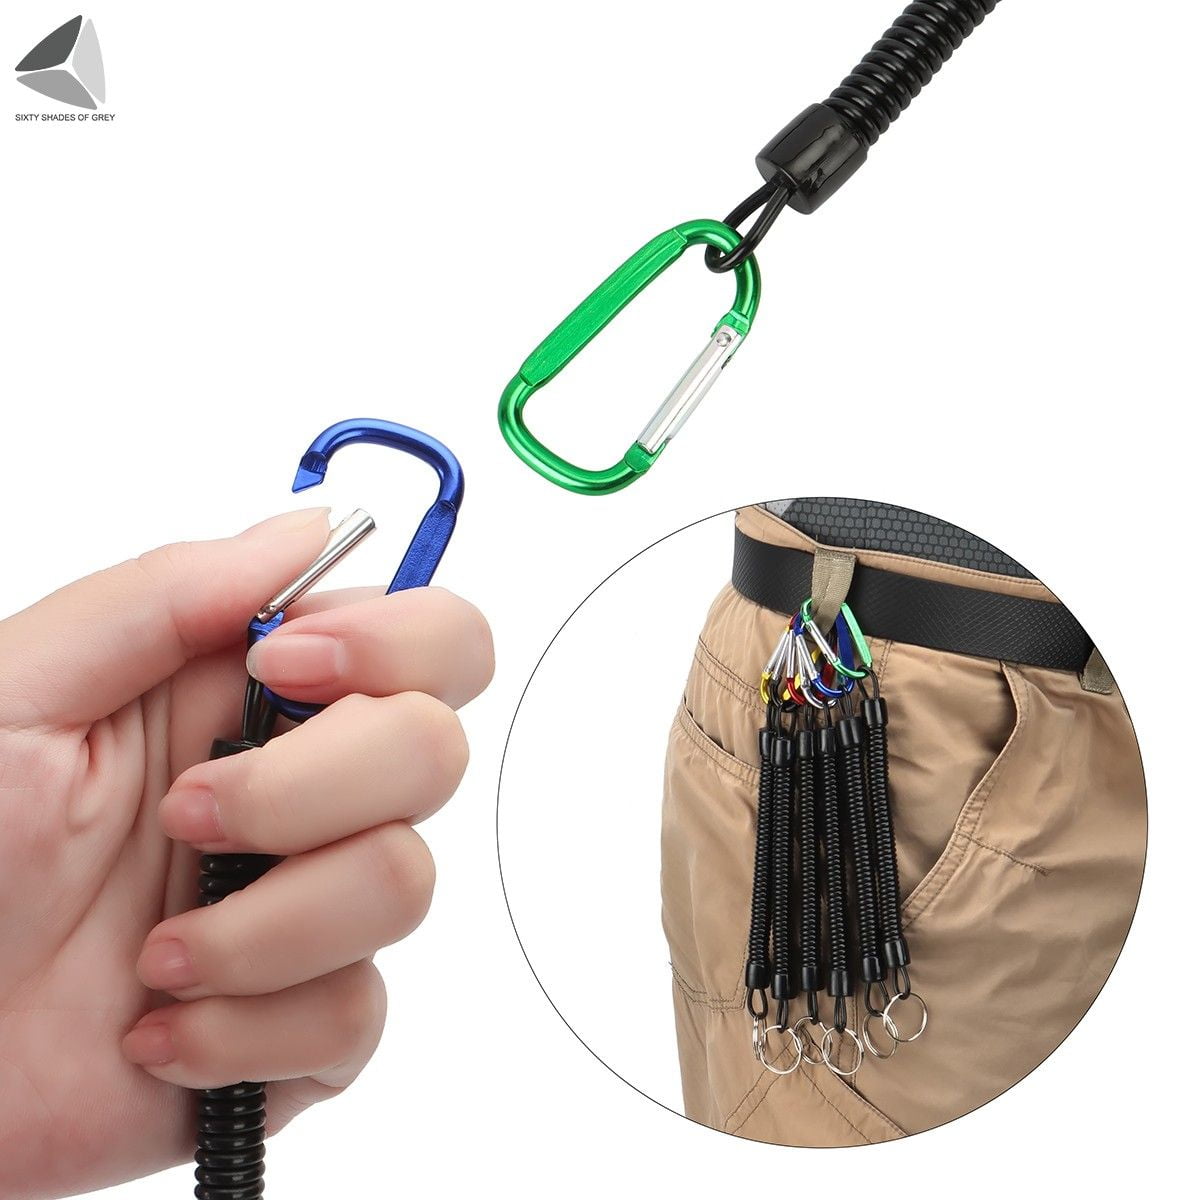 6 Pieces Fishing Lanyard, Multicolor Coiled Lanyards Retractable Coiled Tether  Fishing Tools For Fishing, Hiking, Hunting